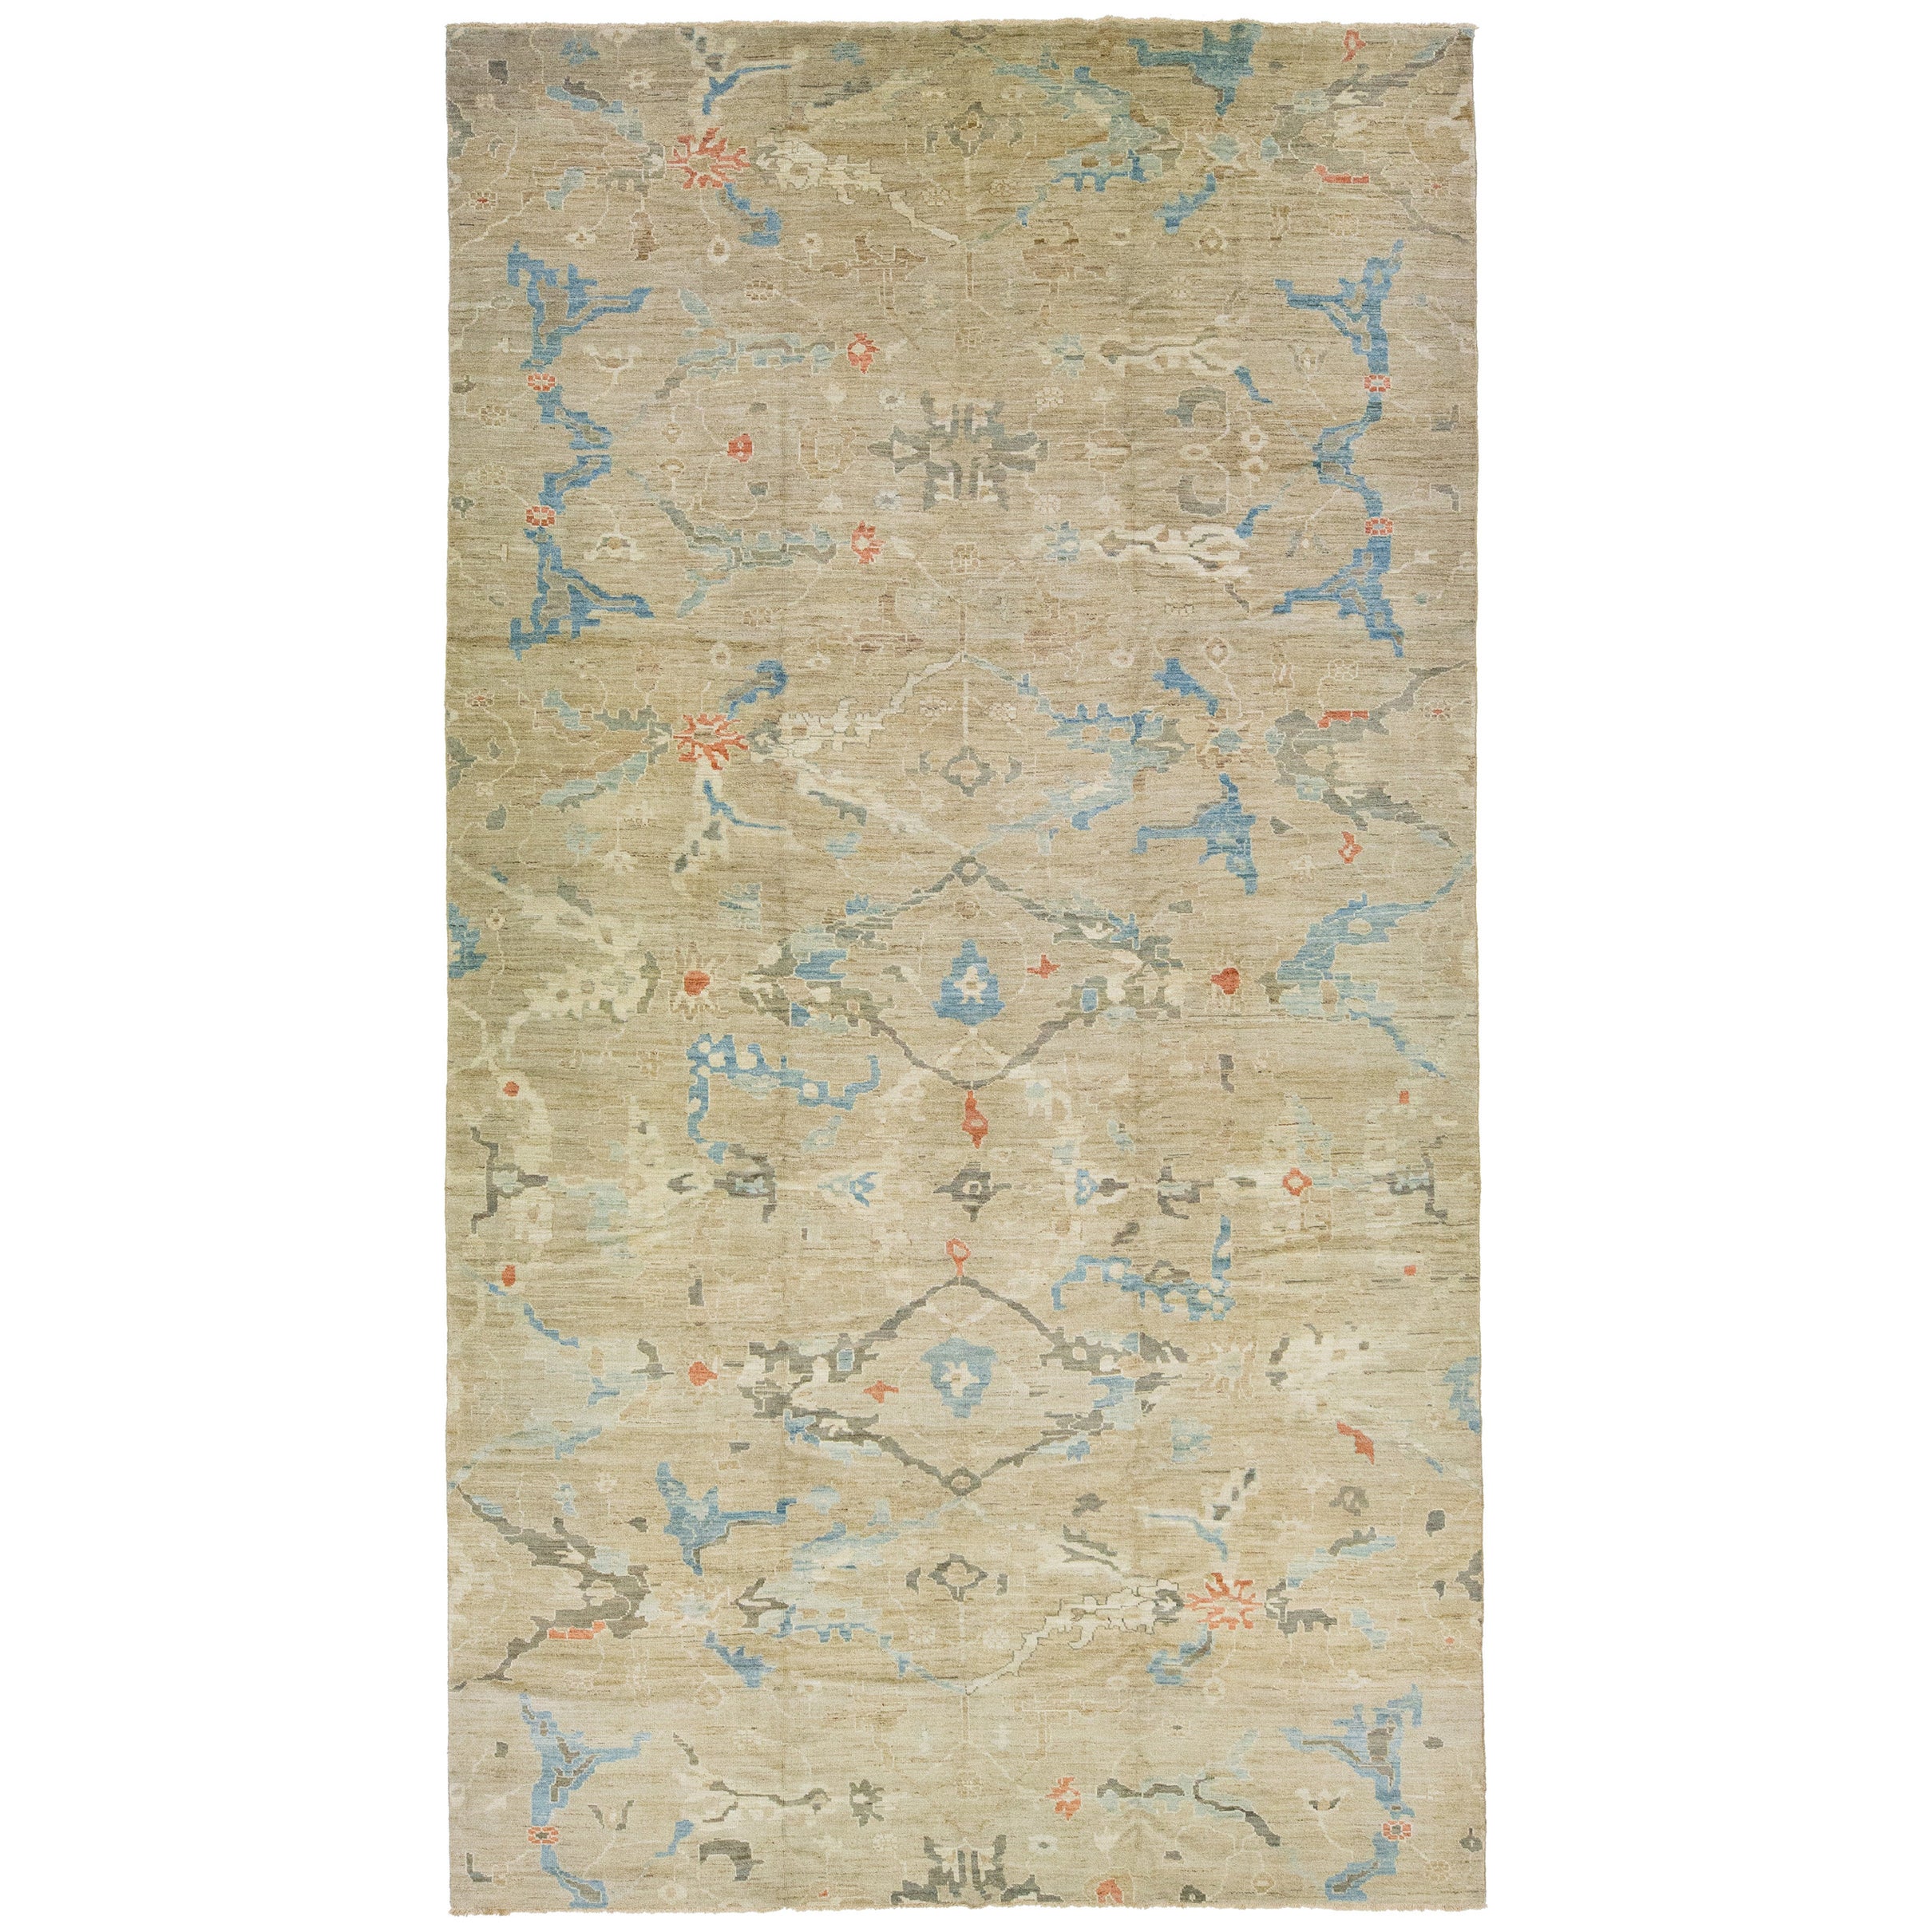 Contemporary Oushak Style Wool Rug In Brown With Artwork Pattern